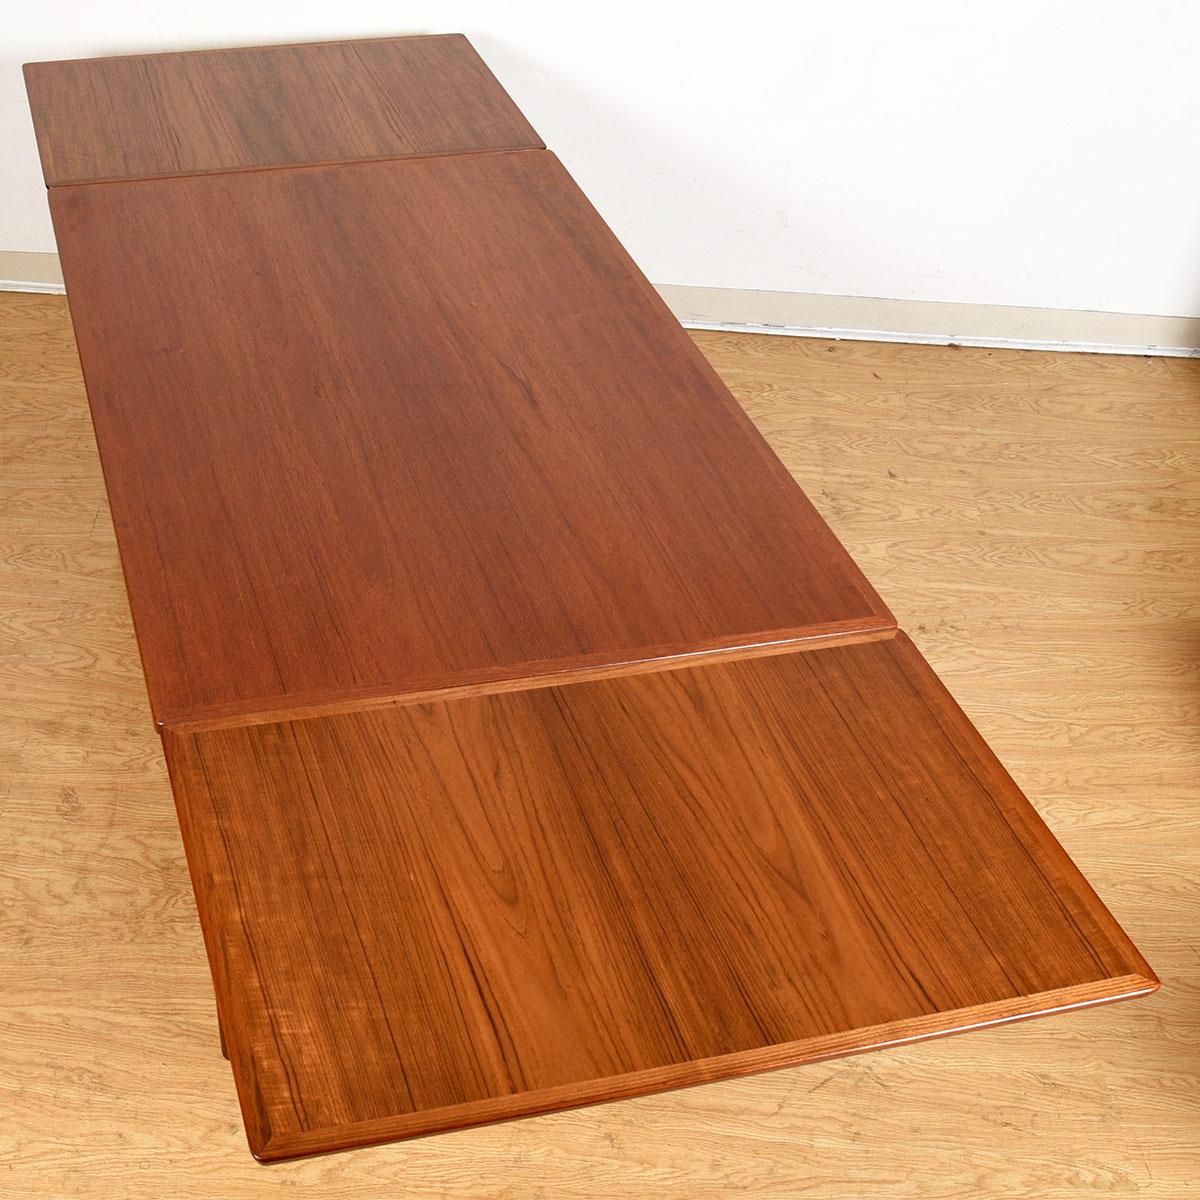 Teak Expanding Danish Modern Mid-Sized Dining Table In Good Condition For Sale In Kensington, MD